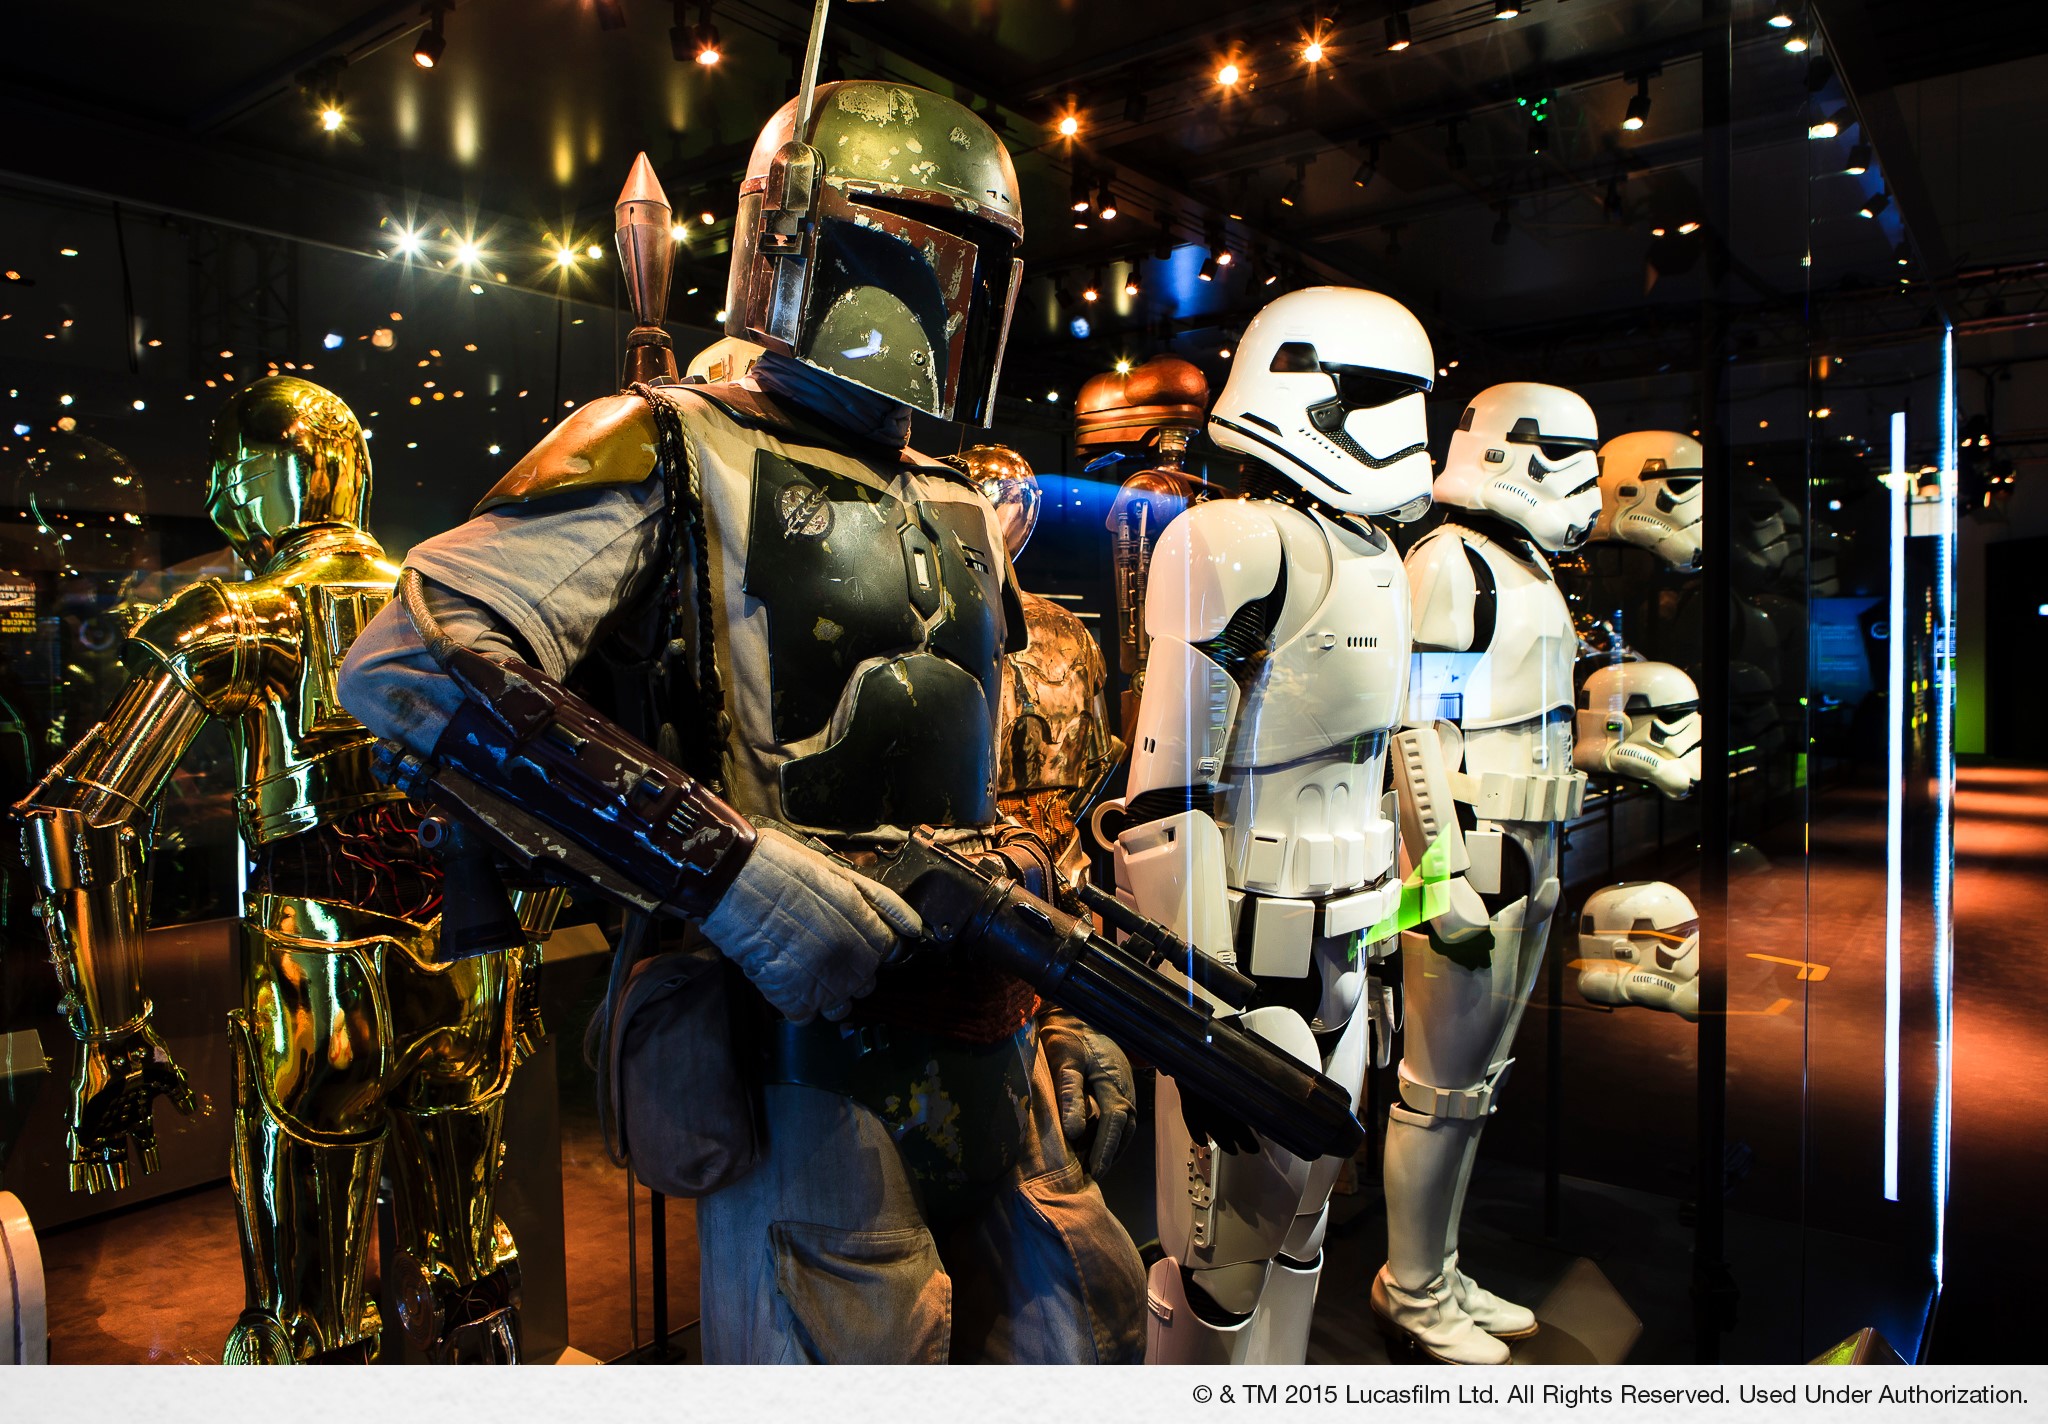 Things to do in February 2021 - stormtroopers armor